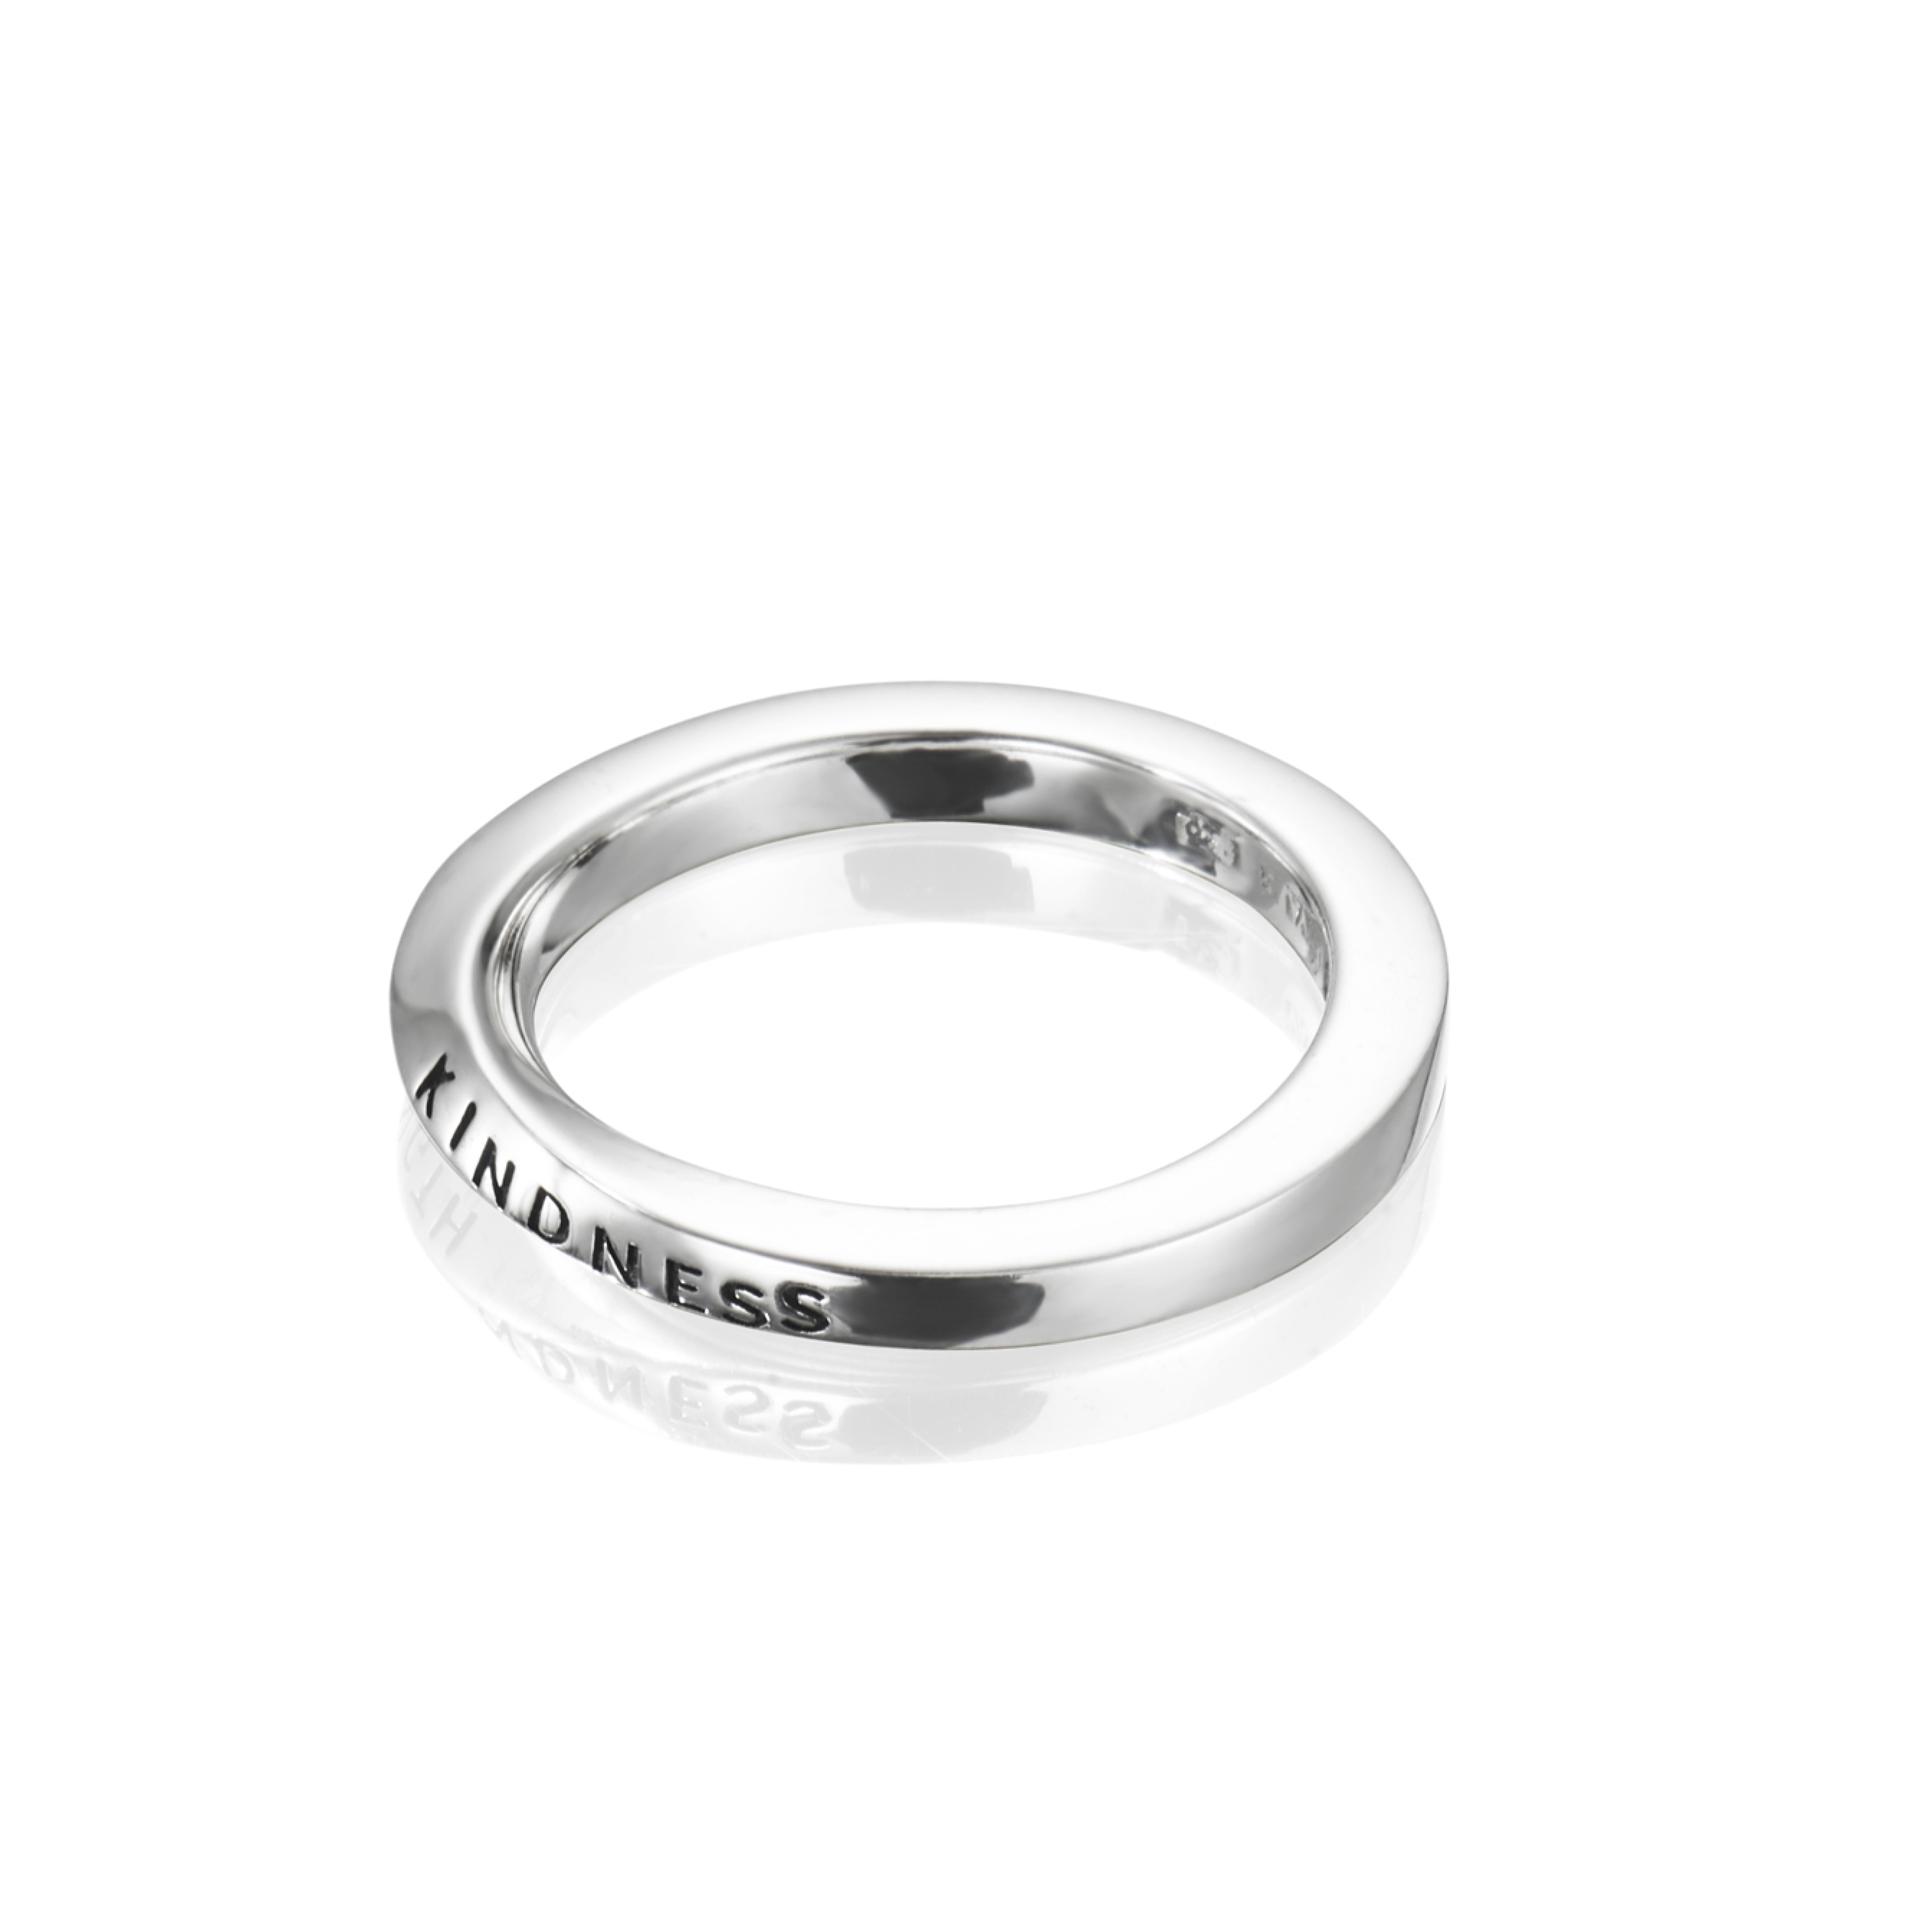 STRENGTH & KINDNESS RING